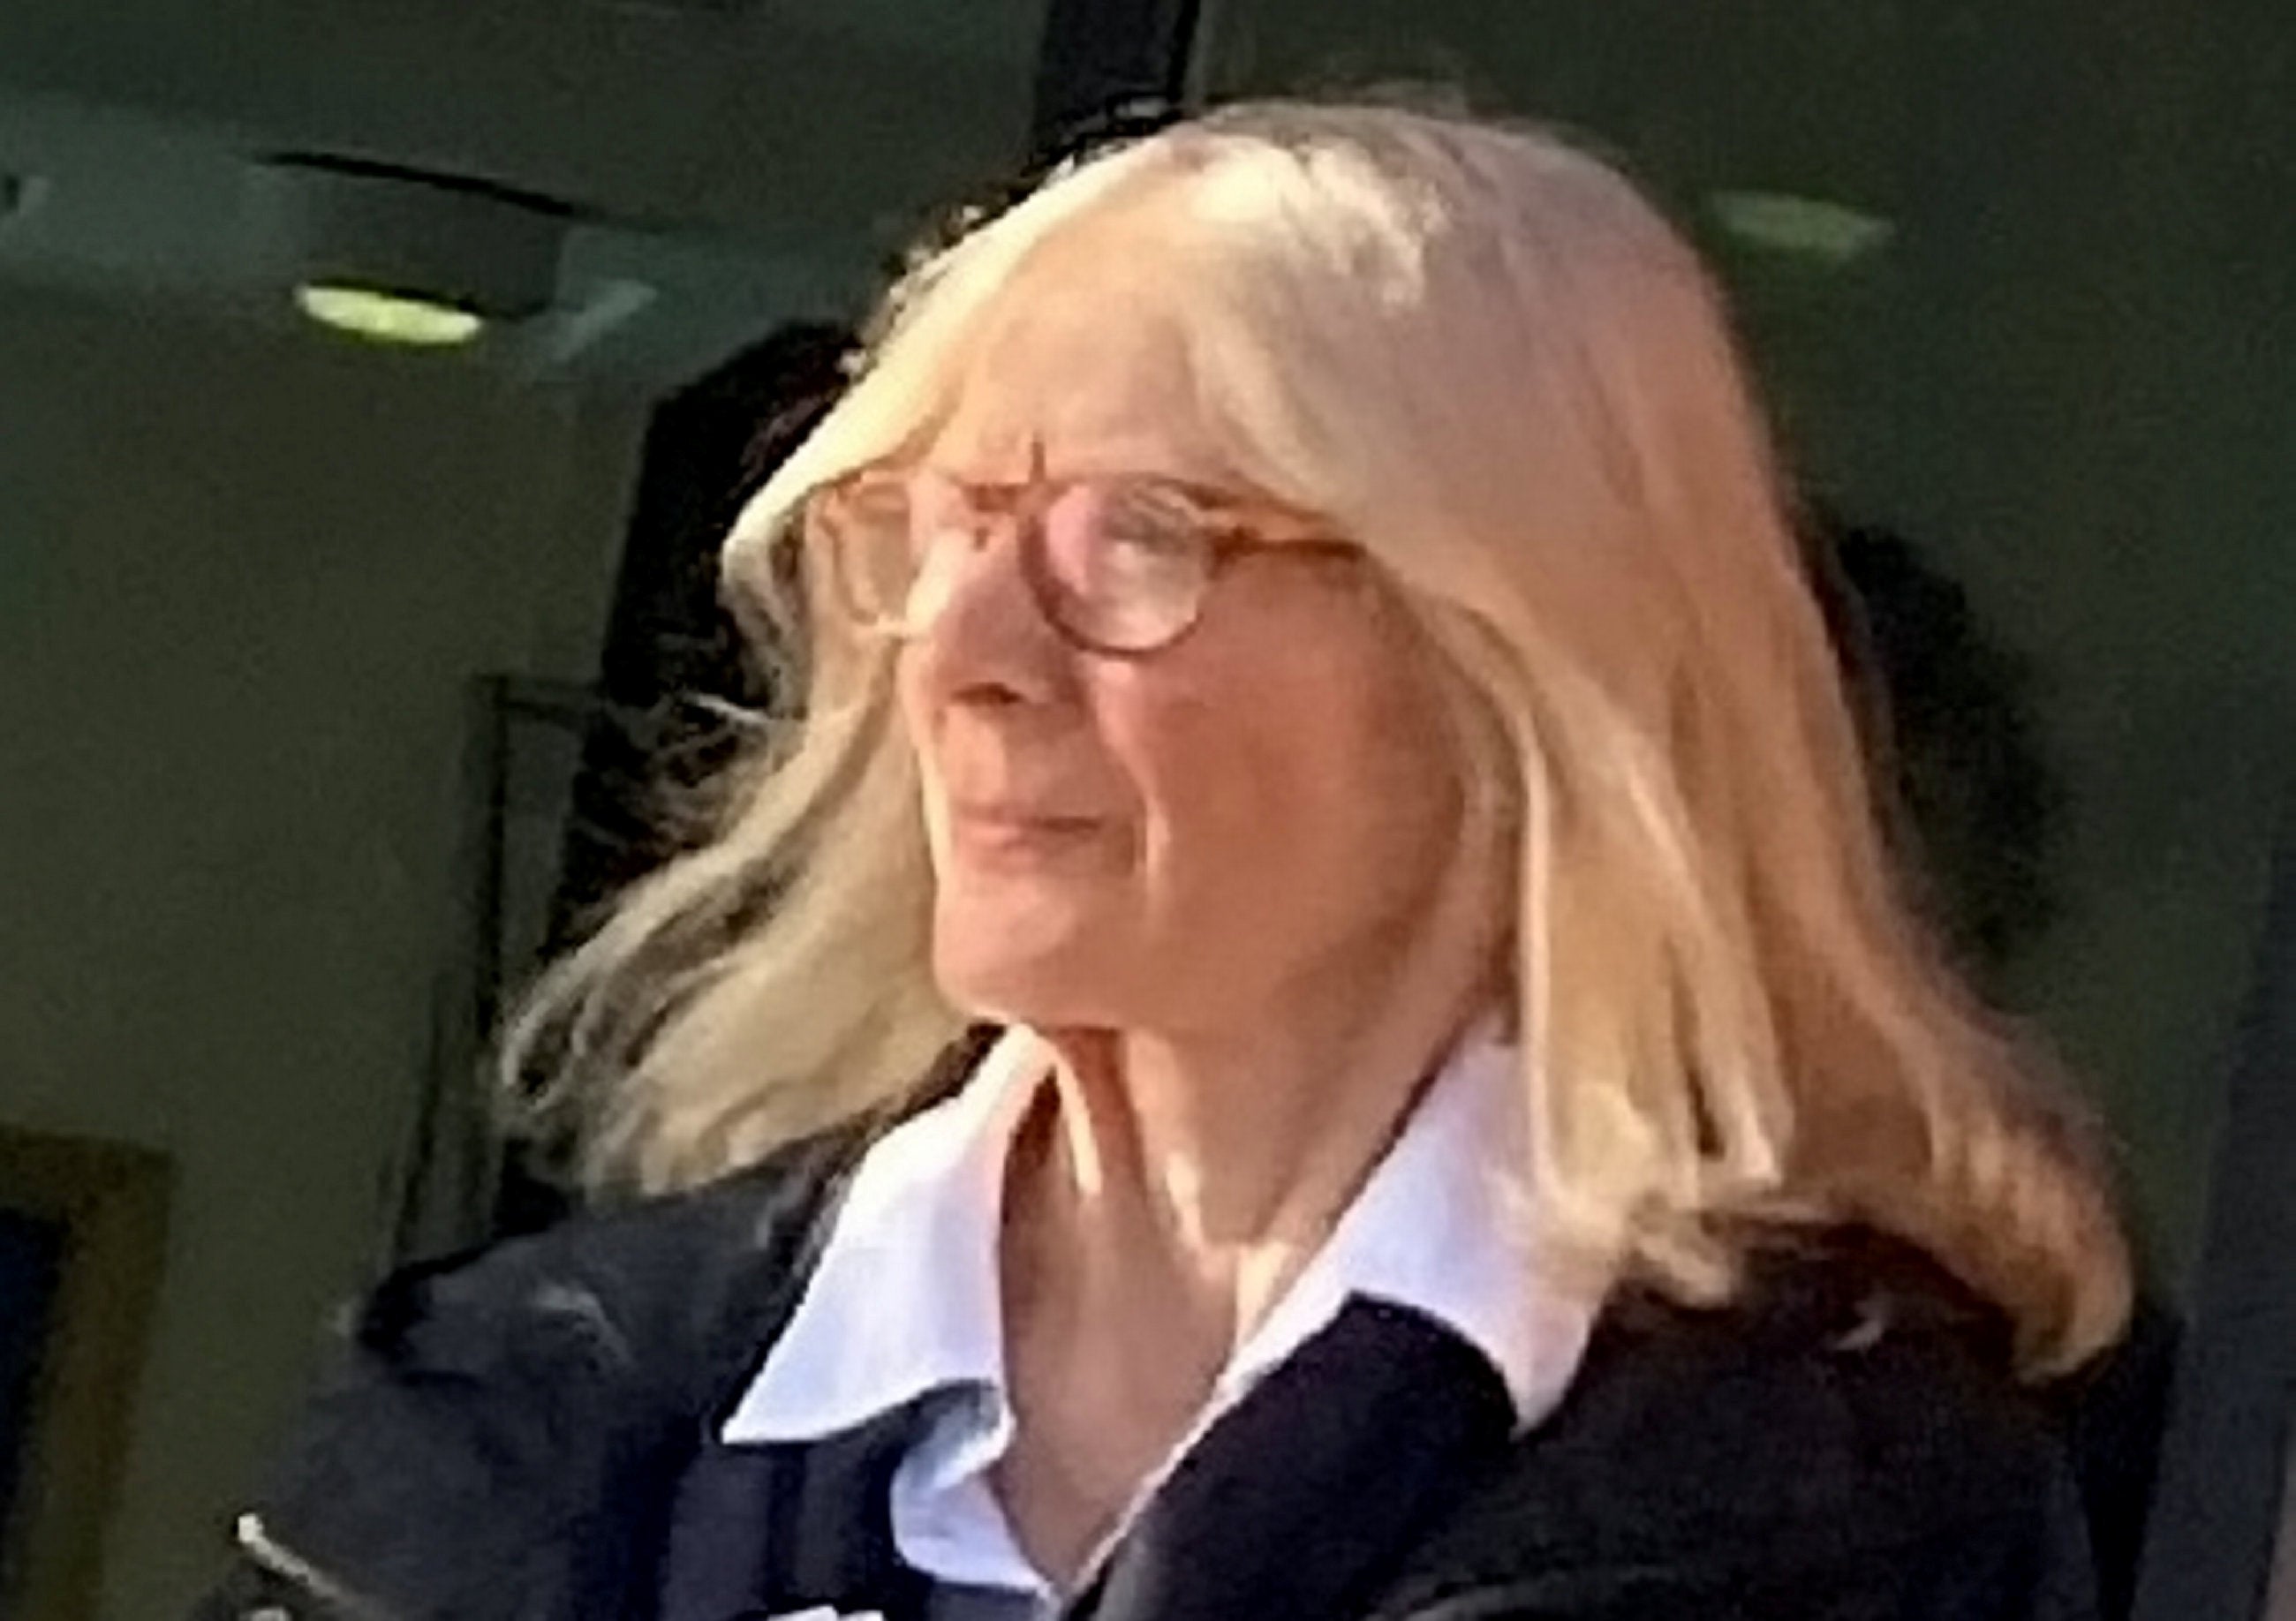 Ms Salmon is 74